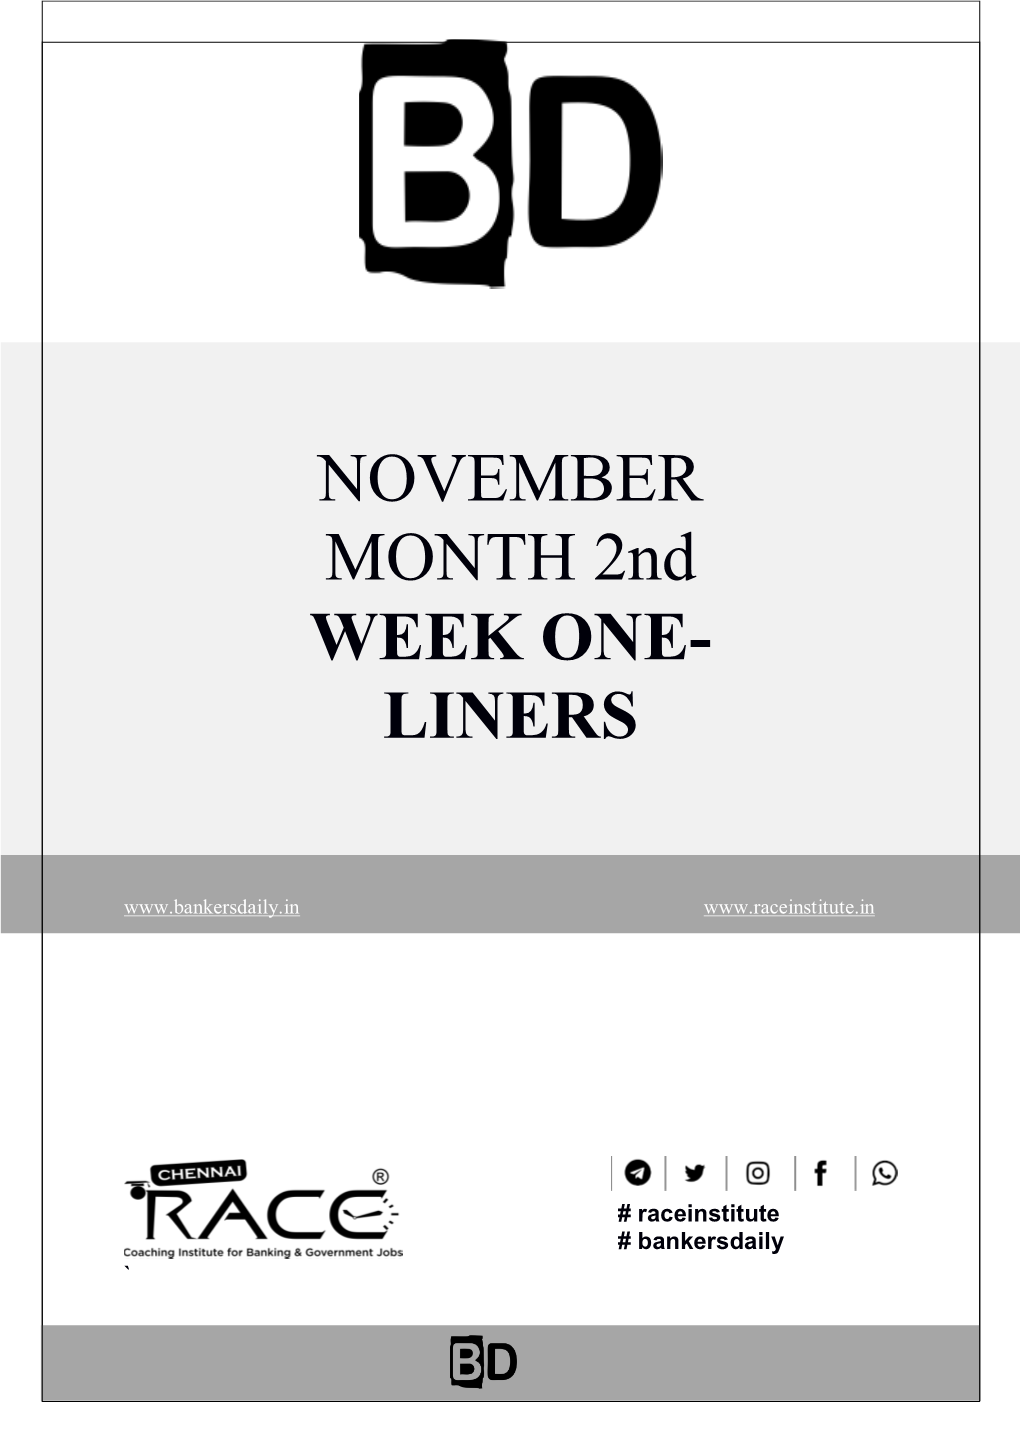 NOVEMBER MONTH 2Nd WEEK ONE- LINERS